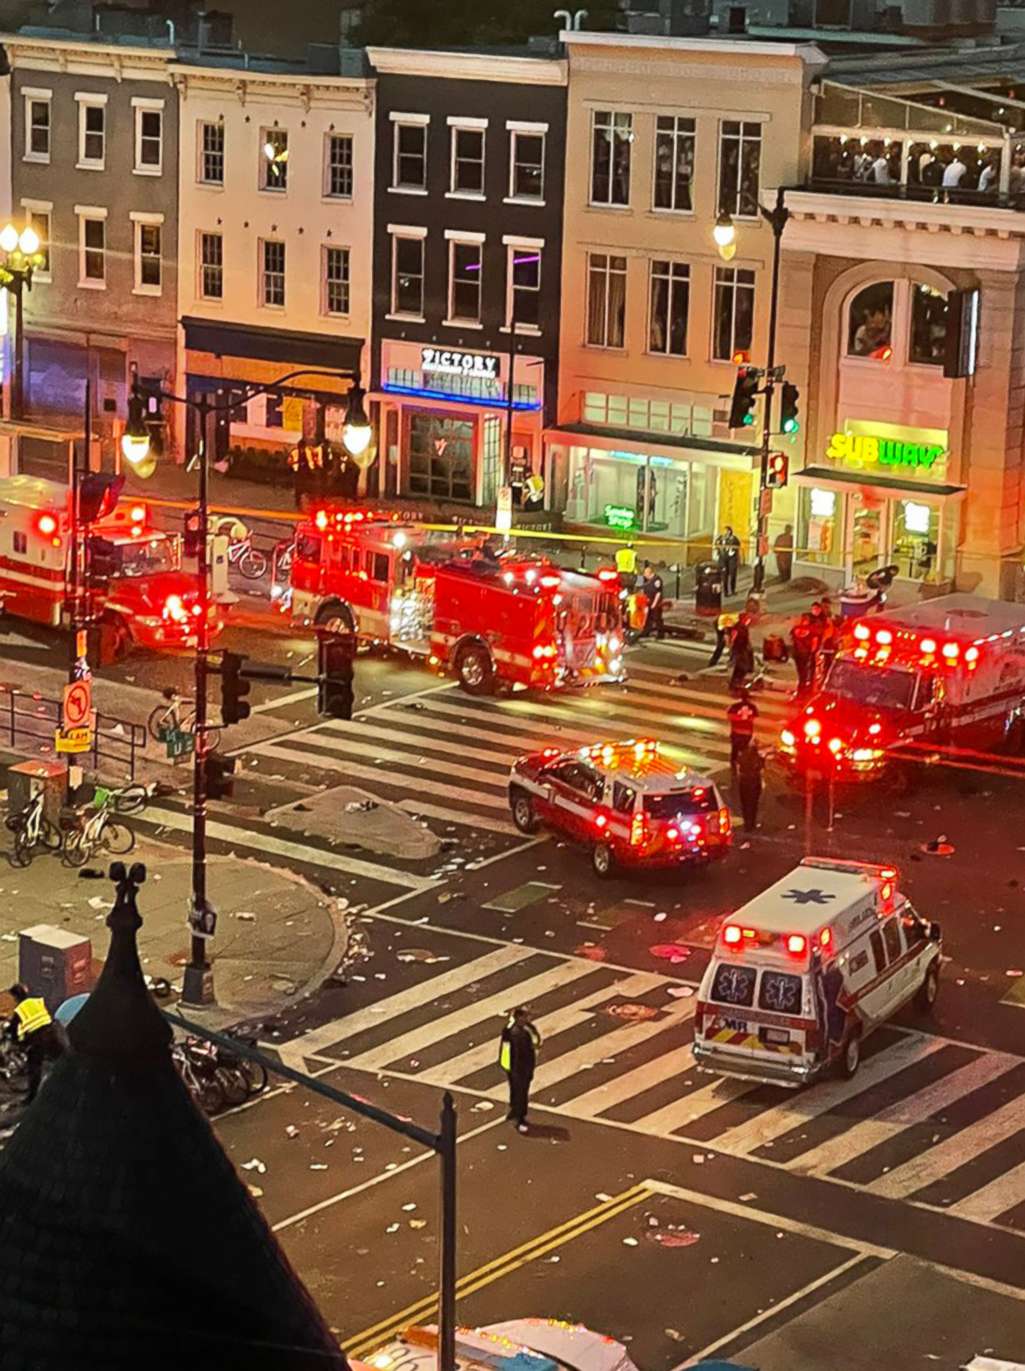 PHOTO: Four people were shot, including a 15-year-old boy who died and an injured police officer, at the end of the Moechella concert at 14th and U Streets in Washington, D.C. on June 19, 2022.